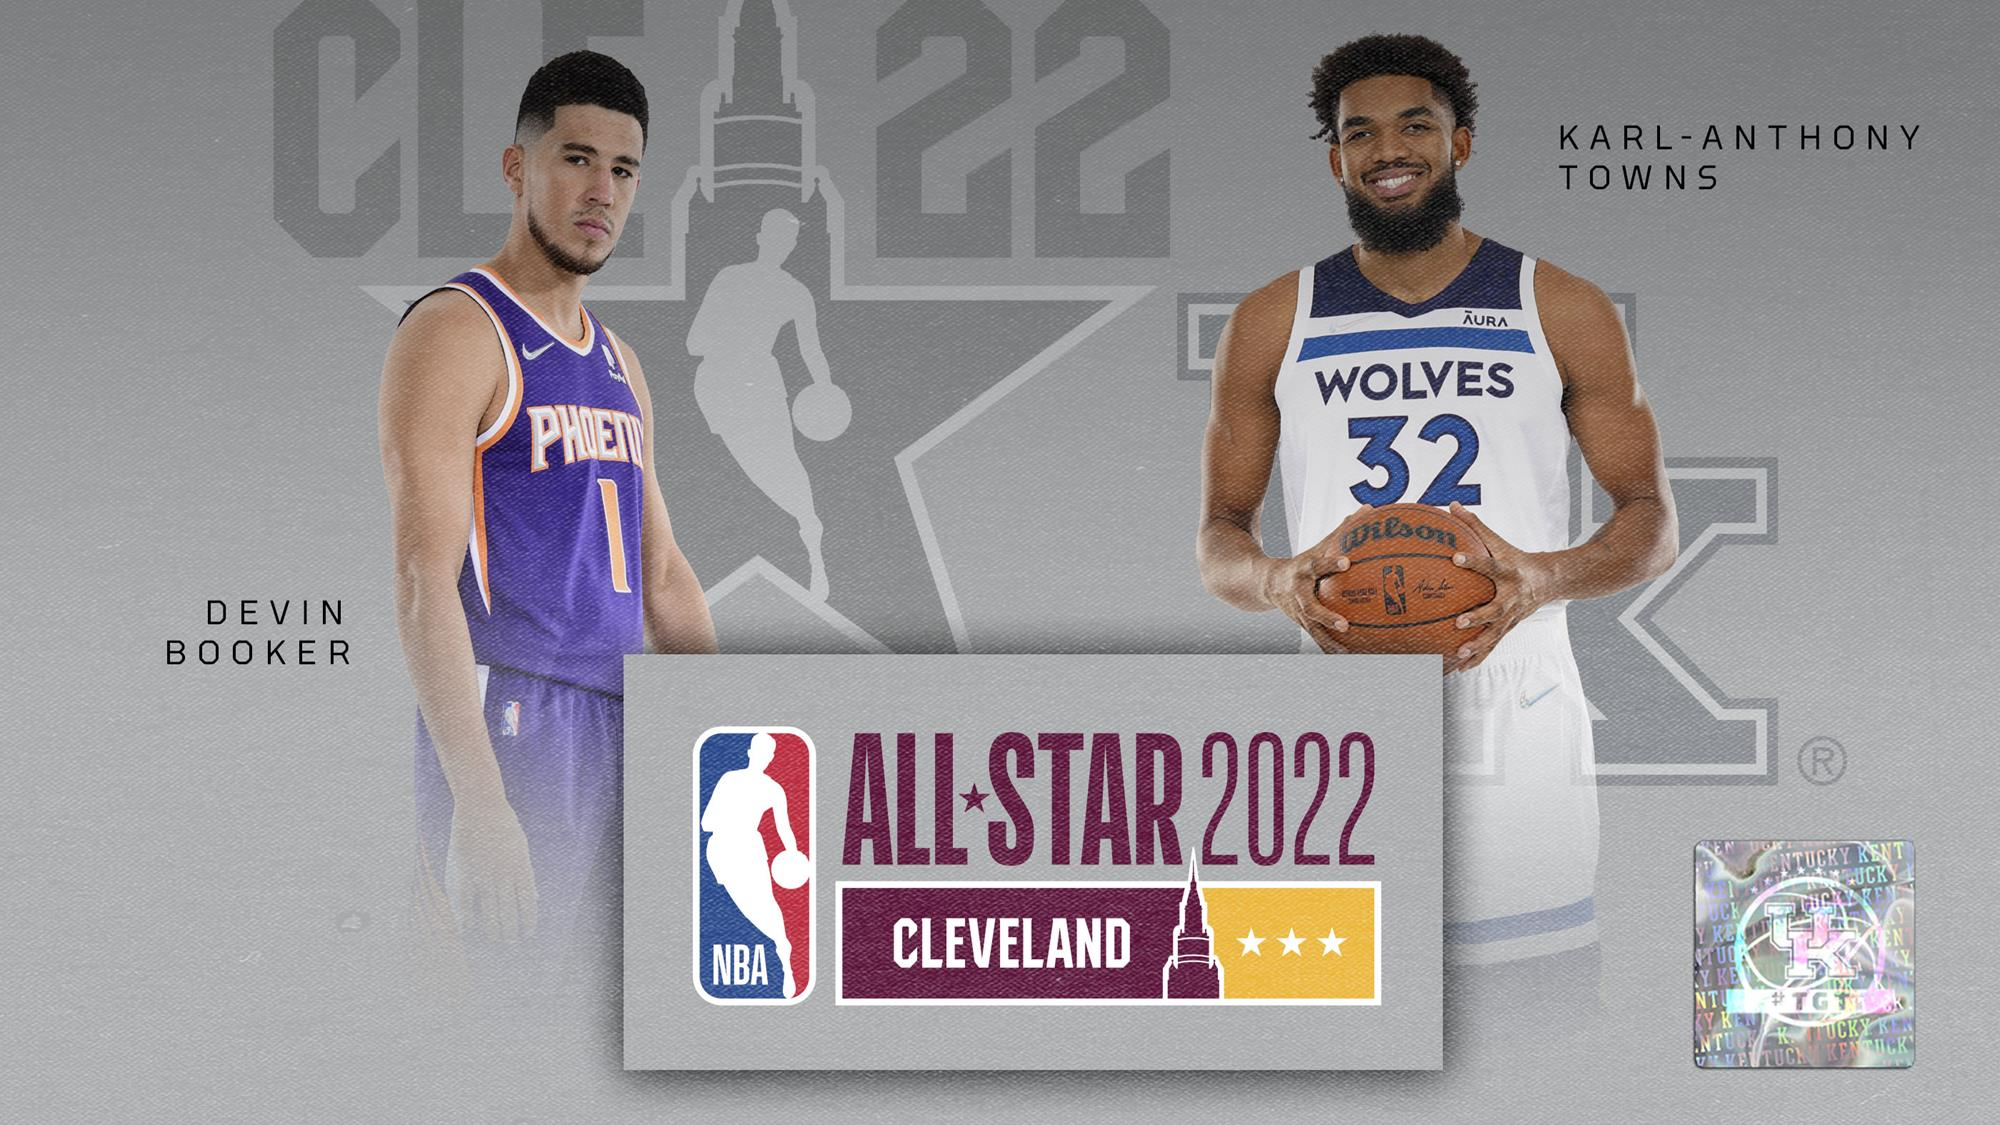 Devin Booker and Karl-Anthony Towns Named 2022 NBA All-Stars